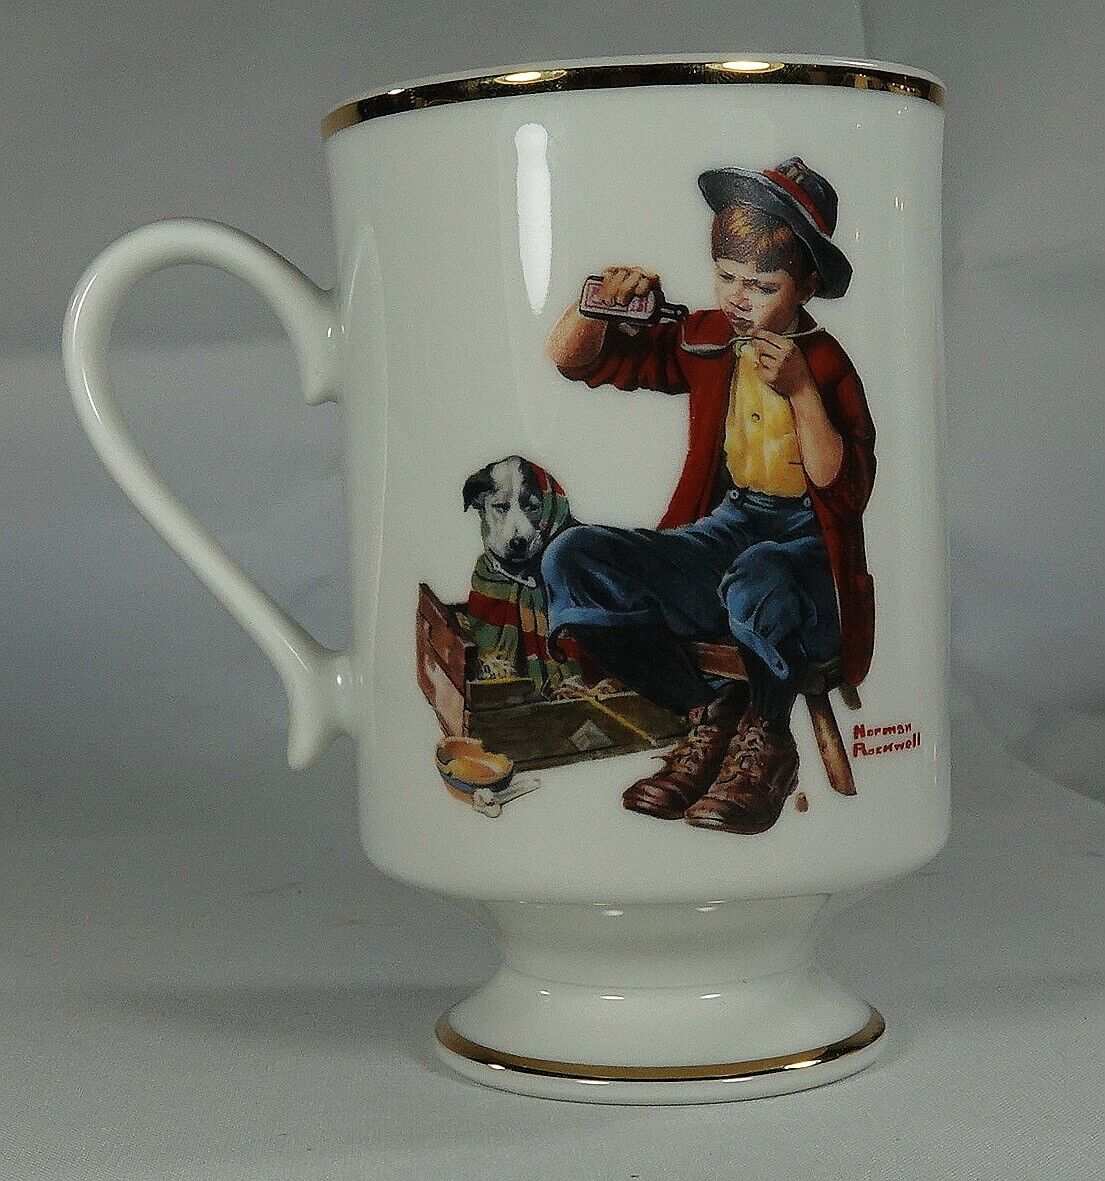 Friend In Need Norman Rockwell Danbury Mint Porcelain Mug - 1981 - Ex. Condition